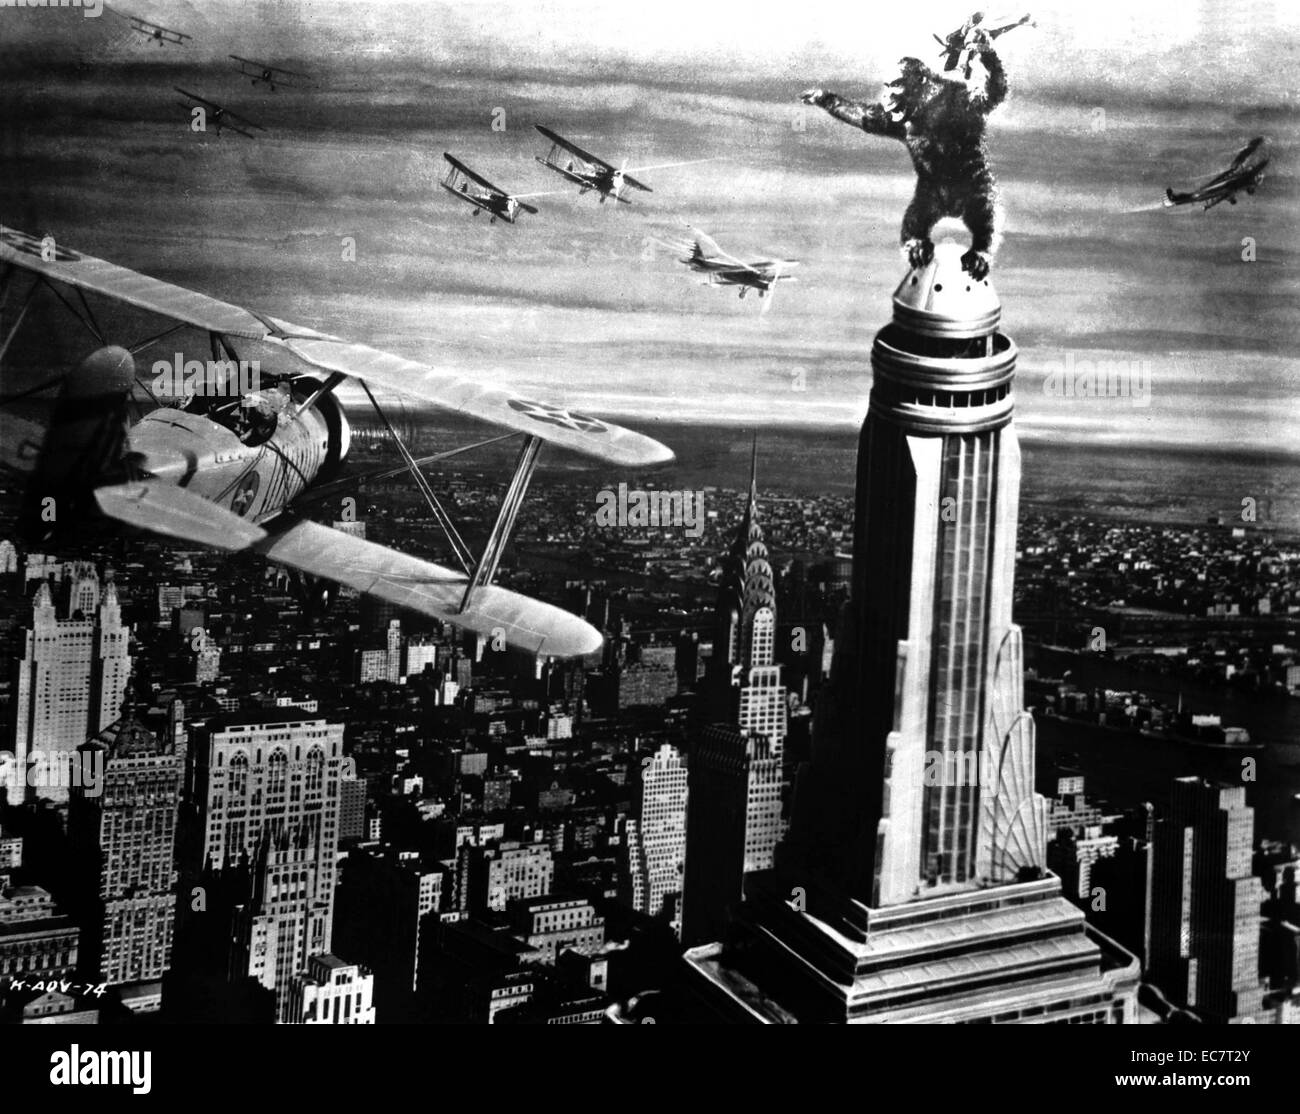 King Kong is a 1933 American fantasy monster/adventure film. It stars Fay Wray, Bruce Cabot and Robert Armstrong, and opened in New York City on March 2, 1933 to rave reviews. The film tells of a gigantic, island-dwelling ape called Kong who dies in an attempt to possess a beautiful young woman. Kong is distinguished for its stop-motion animation by Willis O'Brien and its musical score by Max Steiner. King Kong is often cited as one of the most iconic movies in the history of cinema. Stock Photo